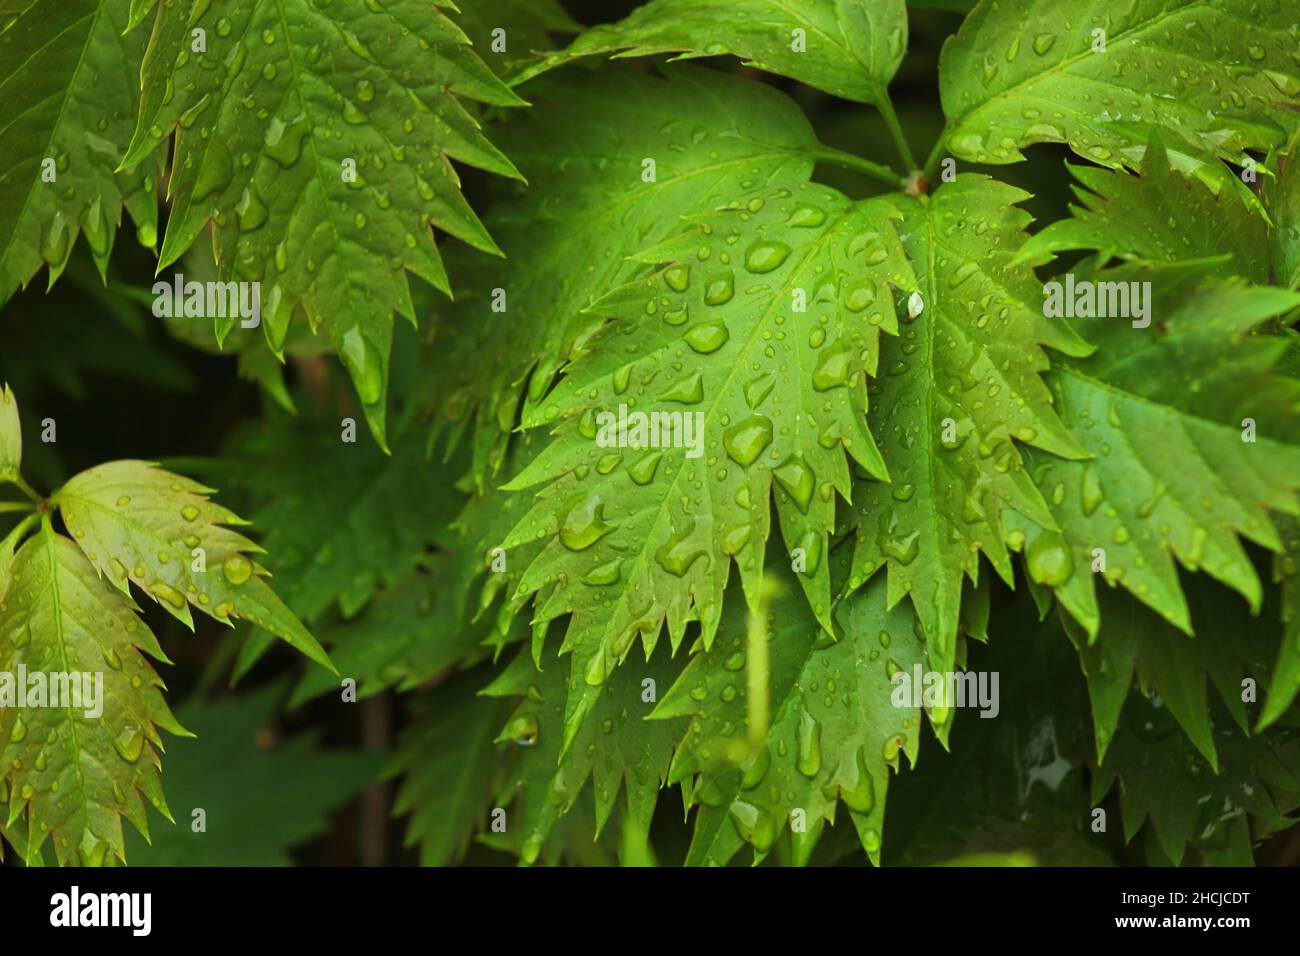 Closeup of pretty textured raindrops on the leaves after rain Stock Photo